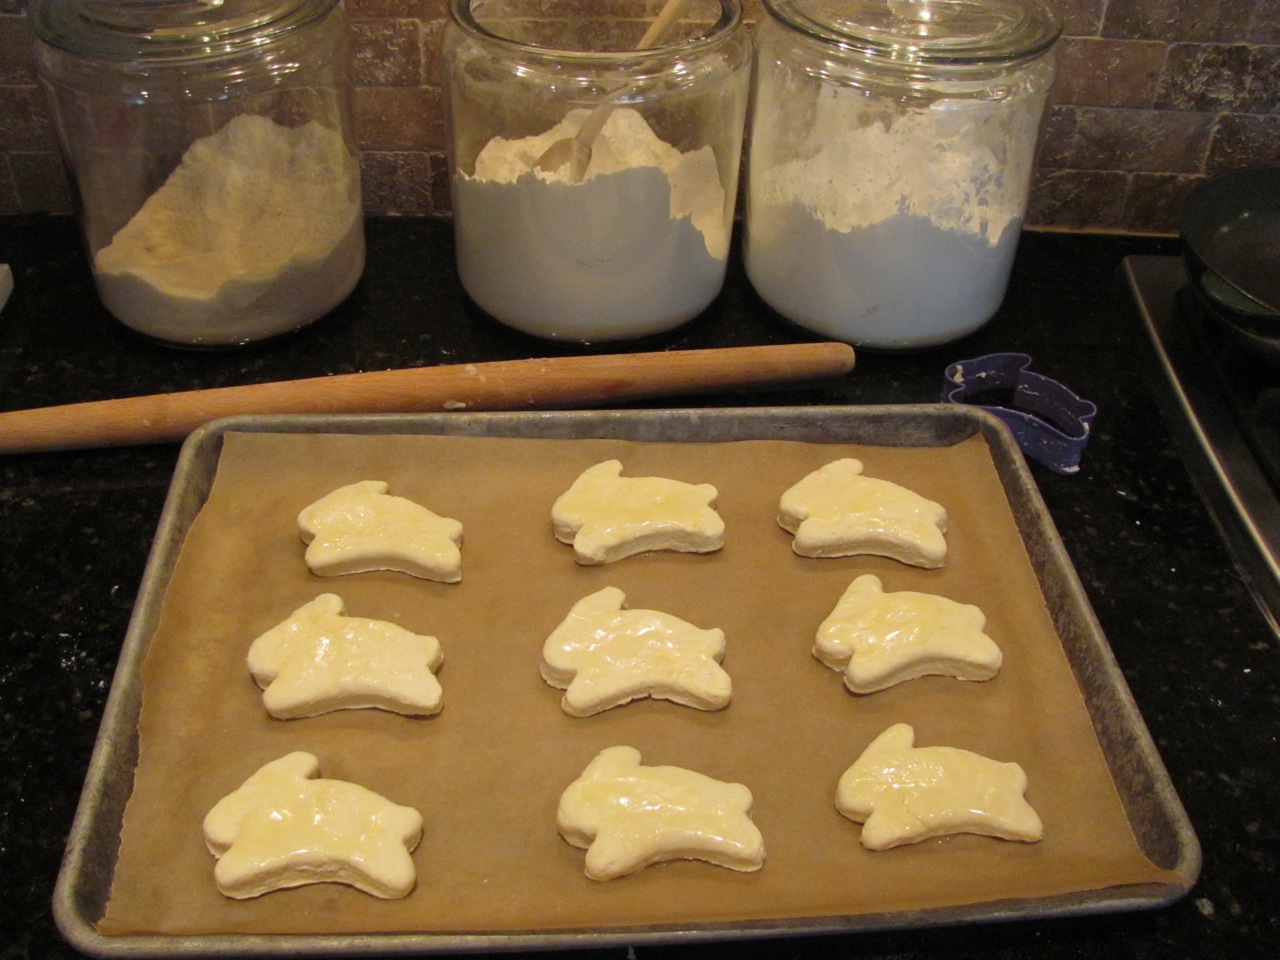 Bunny shaped biscuits ready to bake